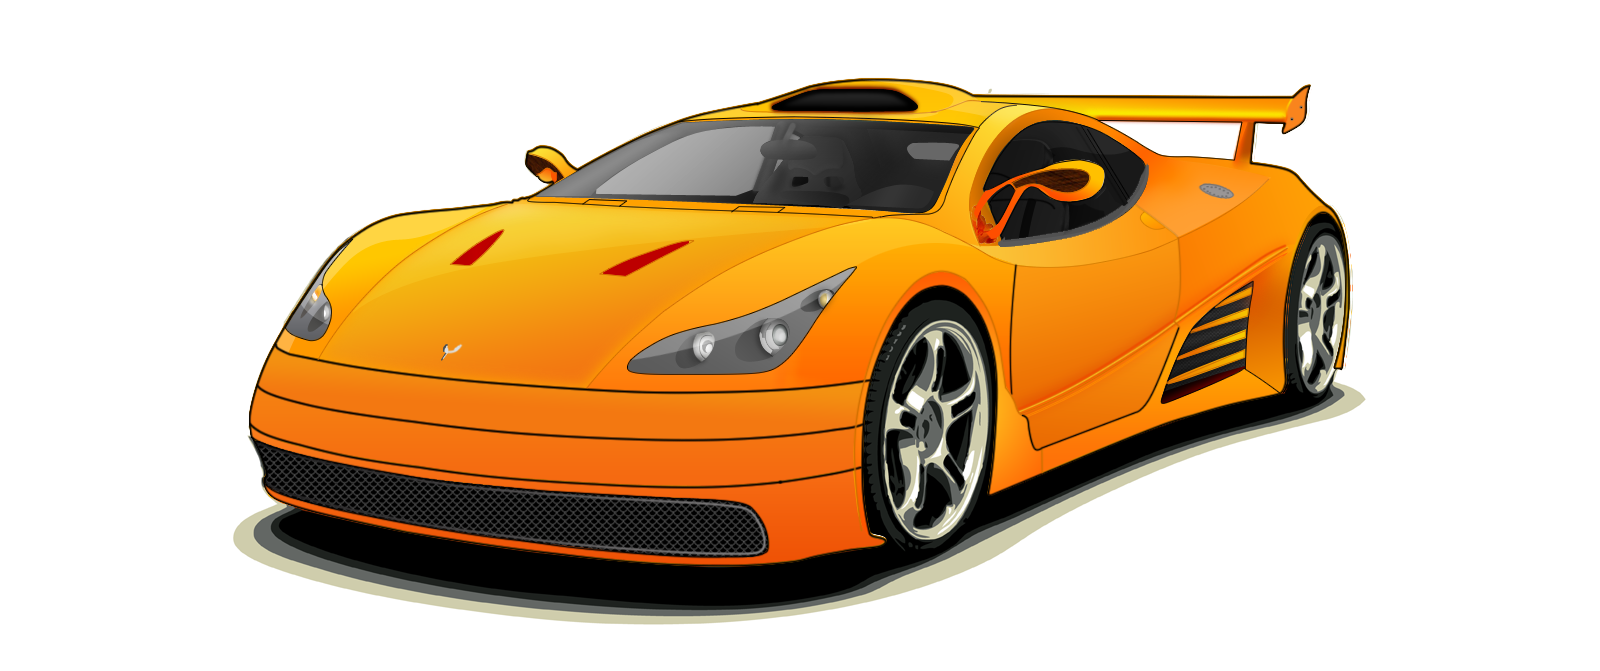 Free Vector Car, Download Free Vector Car png images, Free ClipArts on